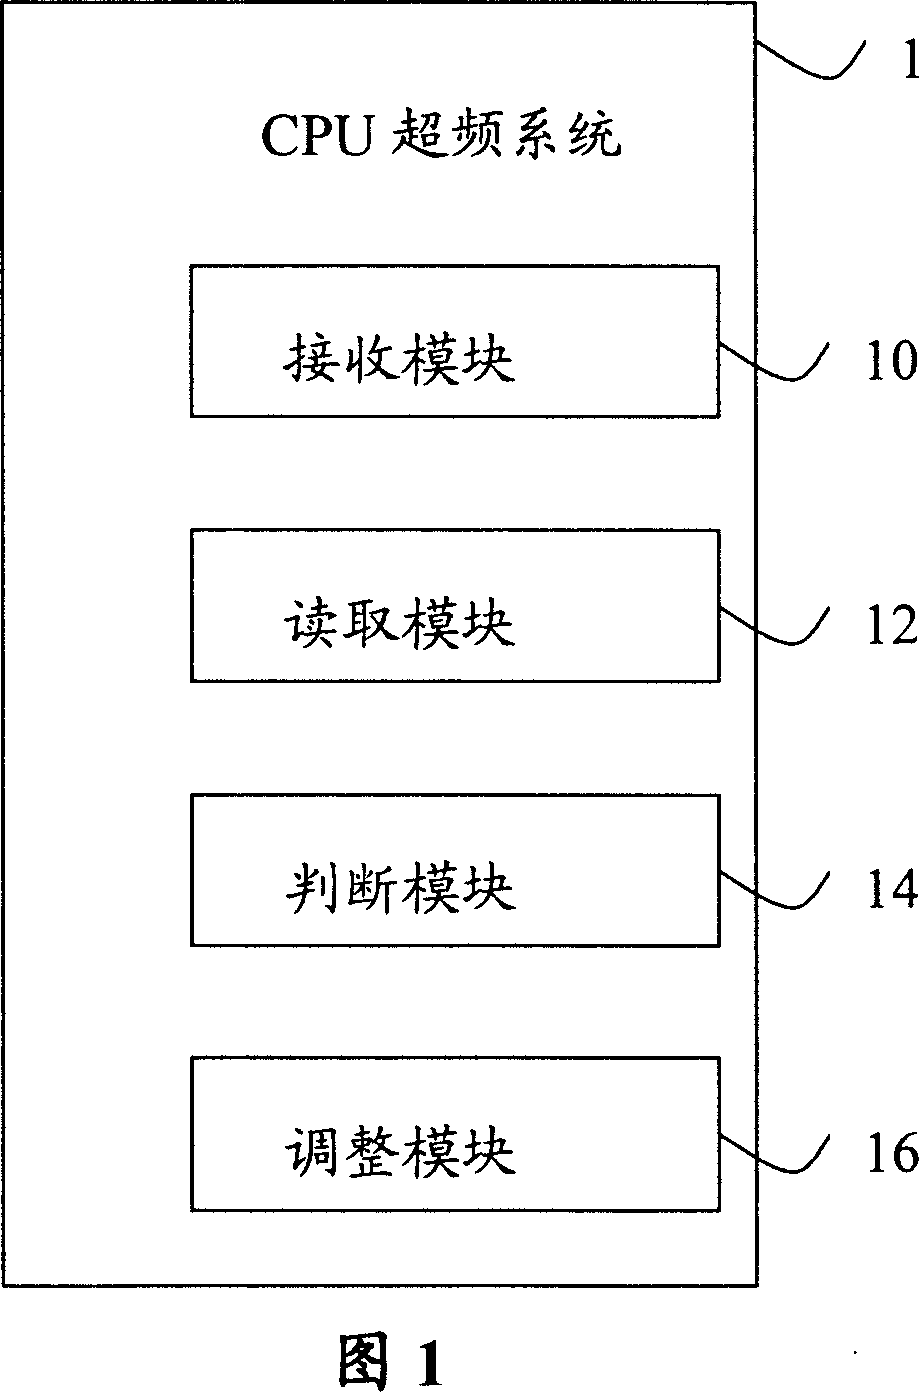 Superfrequency system and method of central processor